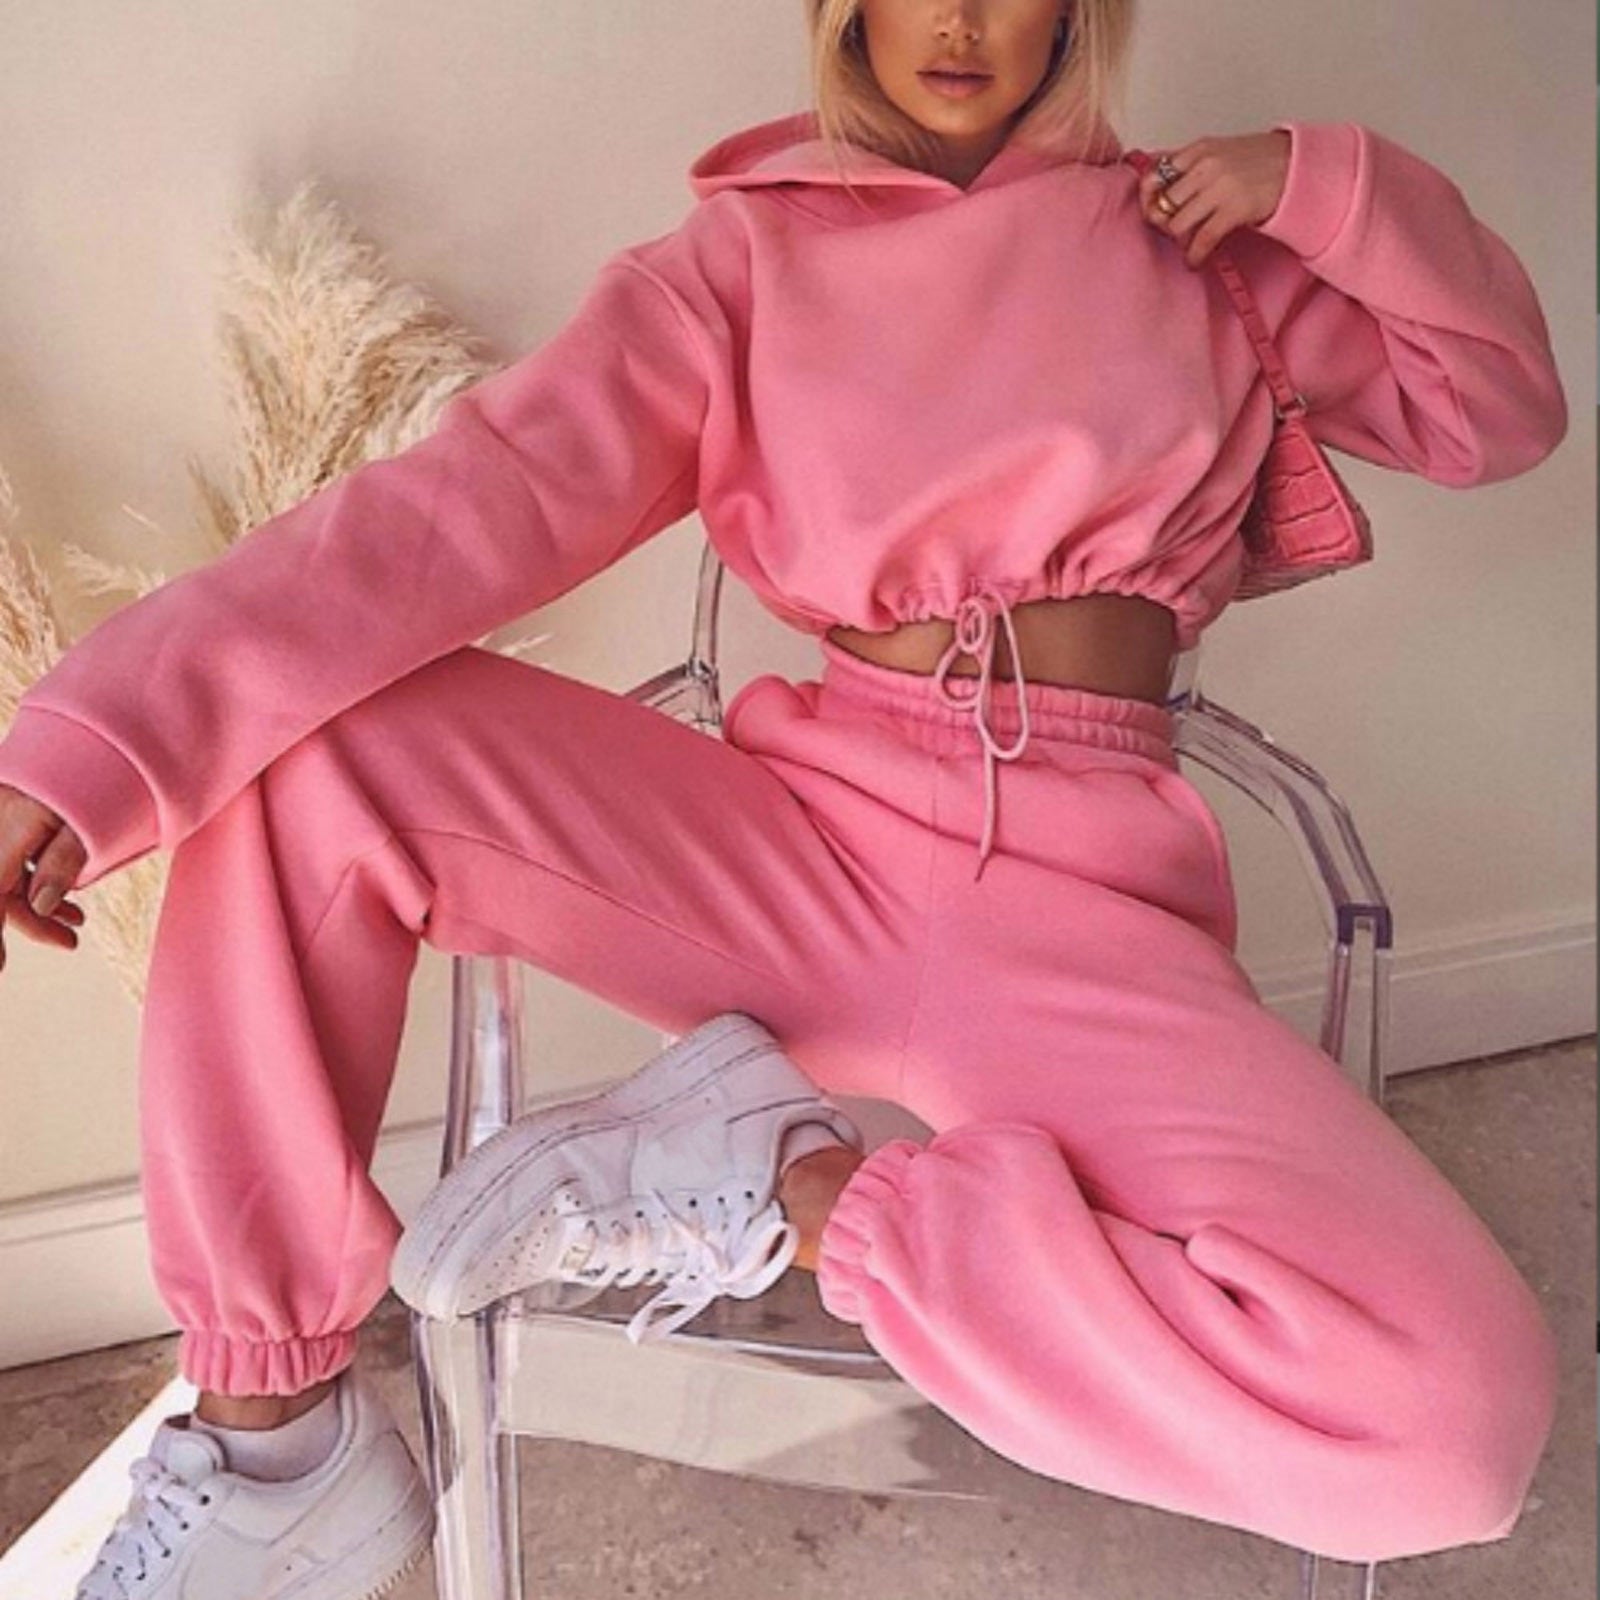 Pink - Jogging Suits For Women - womens sweatsuit at TFC&H Co.